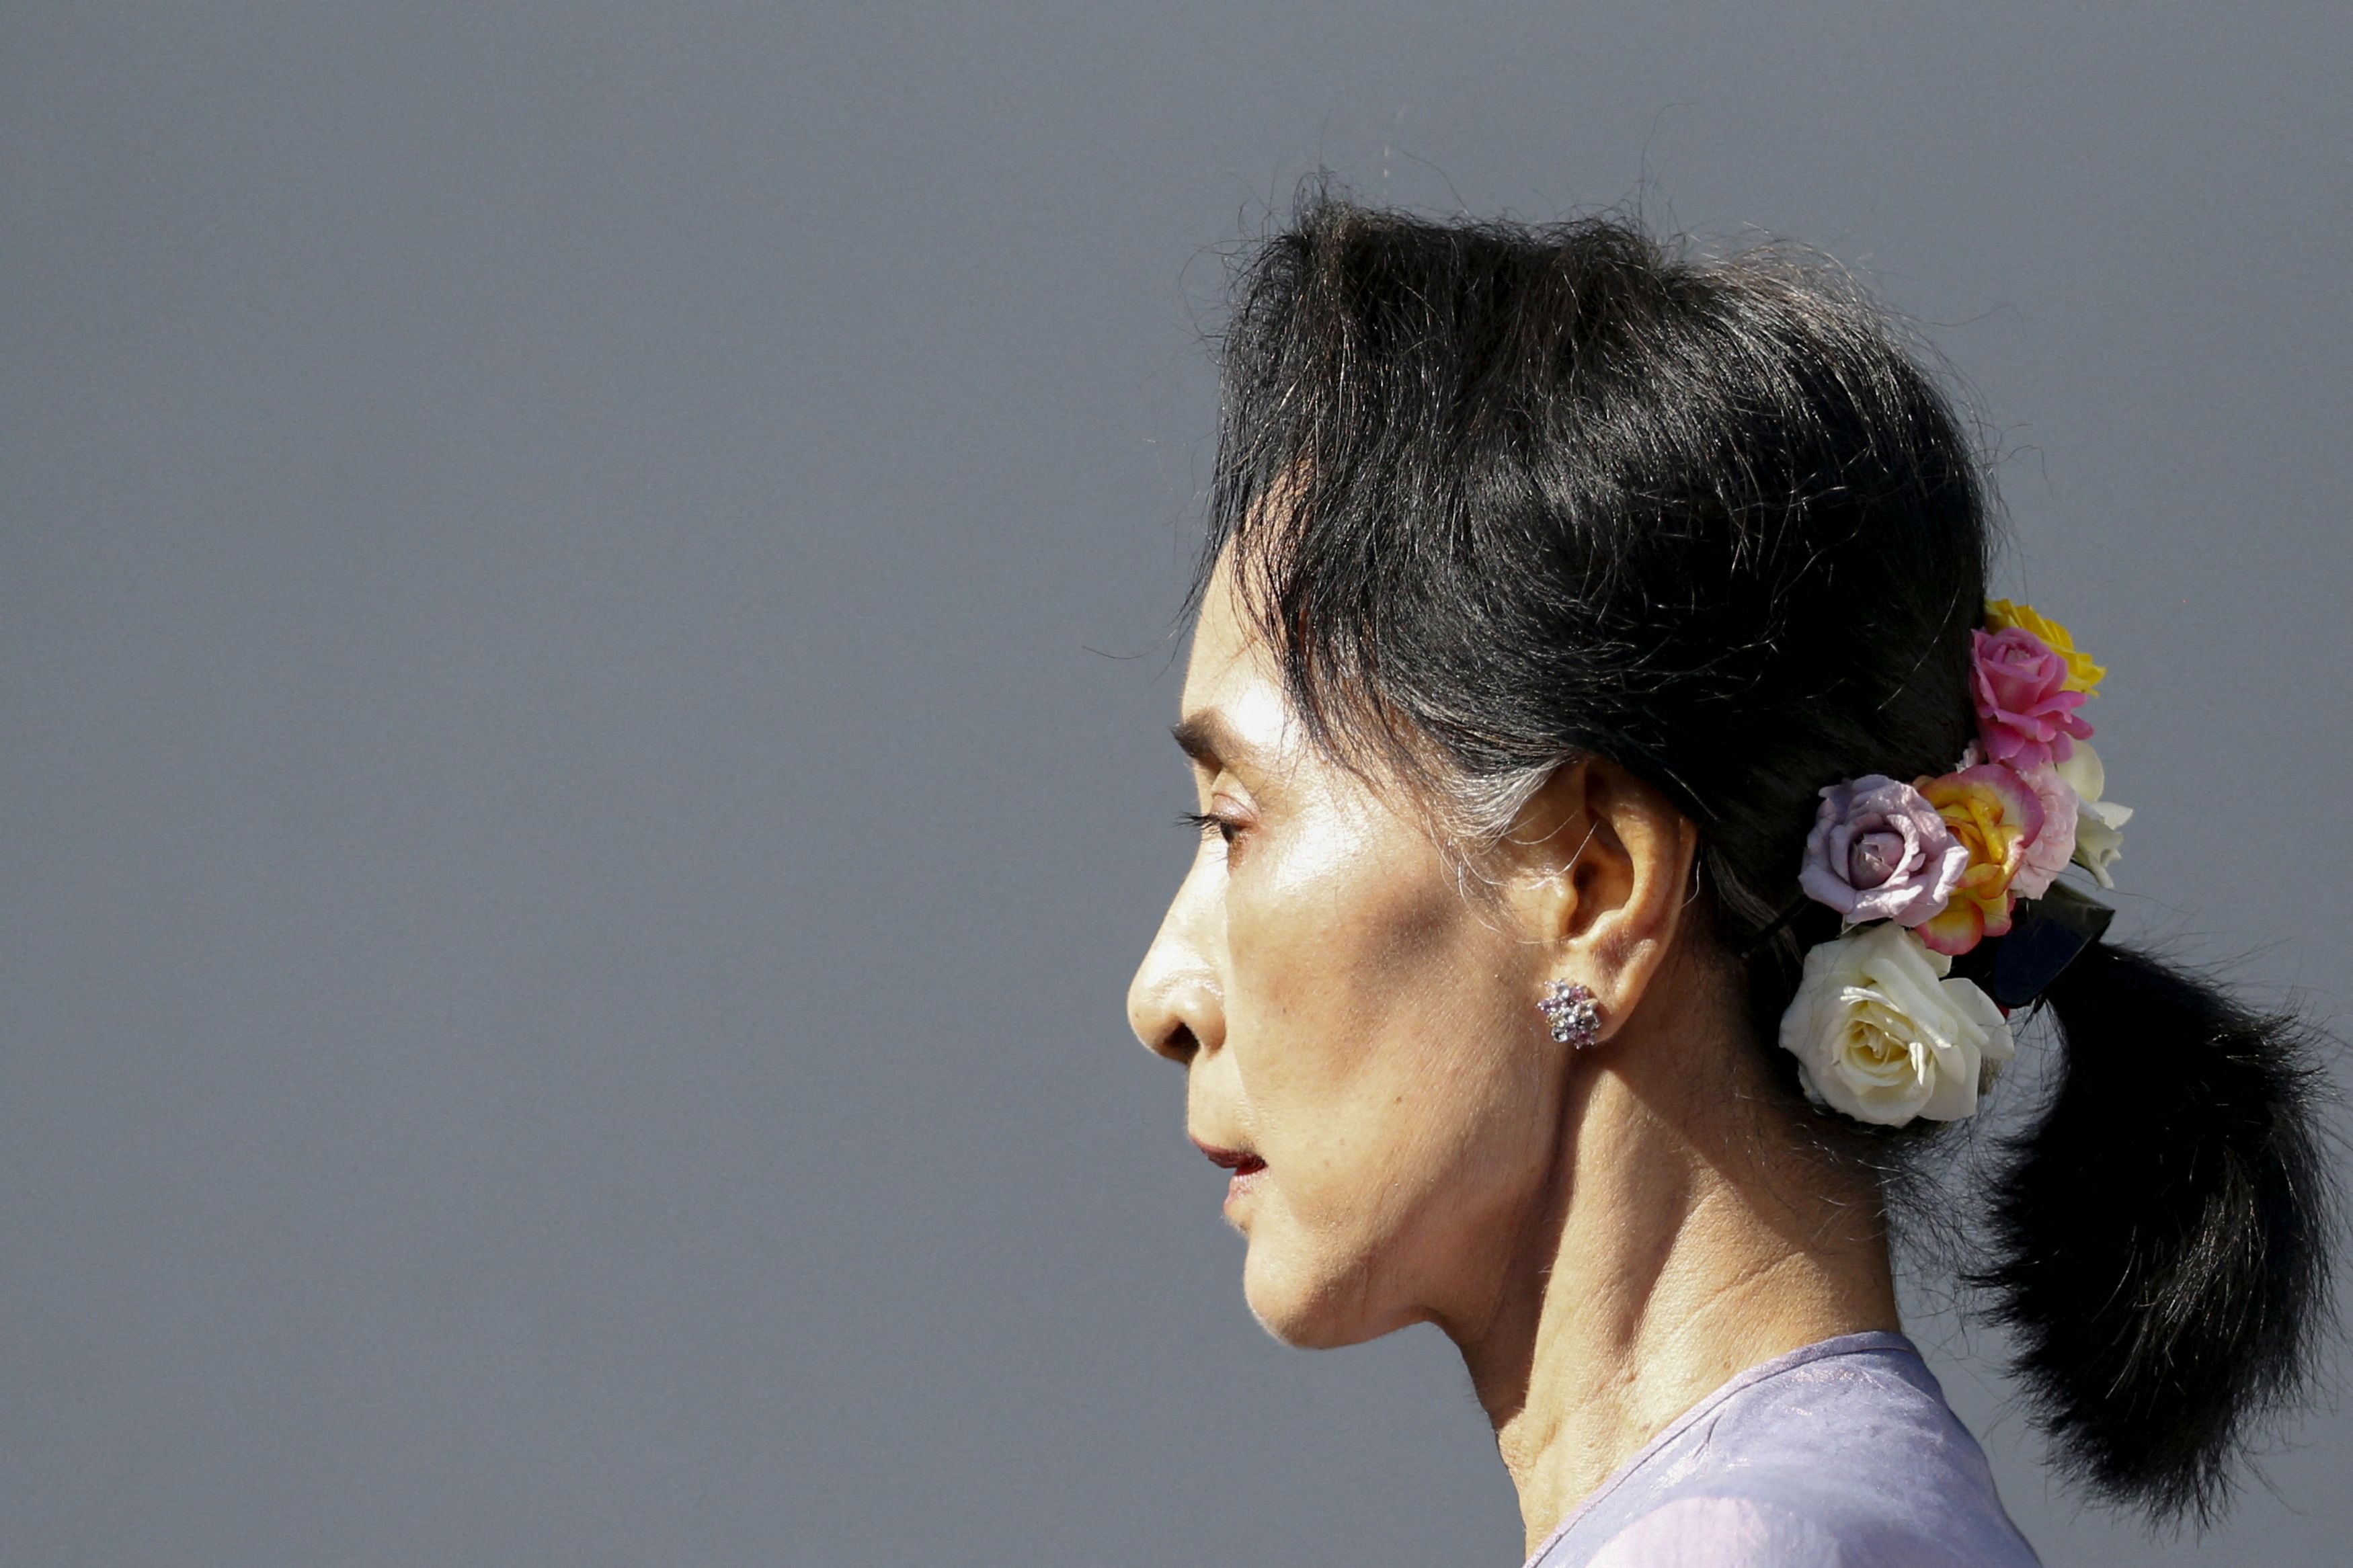 Myanmar National League for Democracy Party Leader Aung San Suu Kyi arrives at a press conference at her home in Yangon on November 5, 2015. REUTERS / Jorge Silva / File Photo